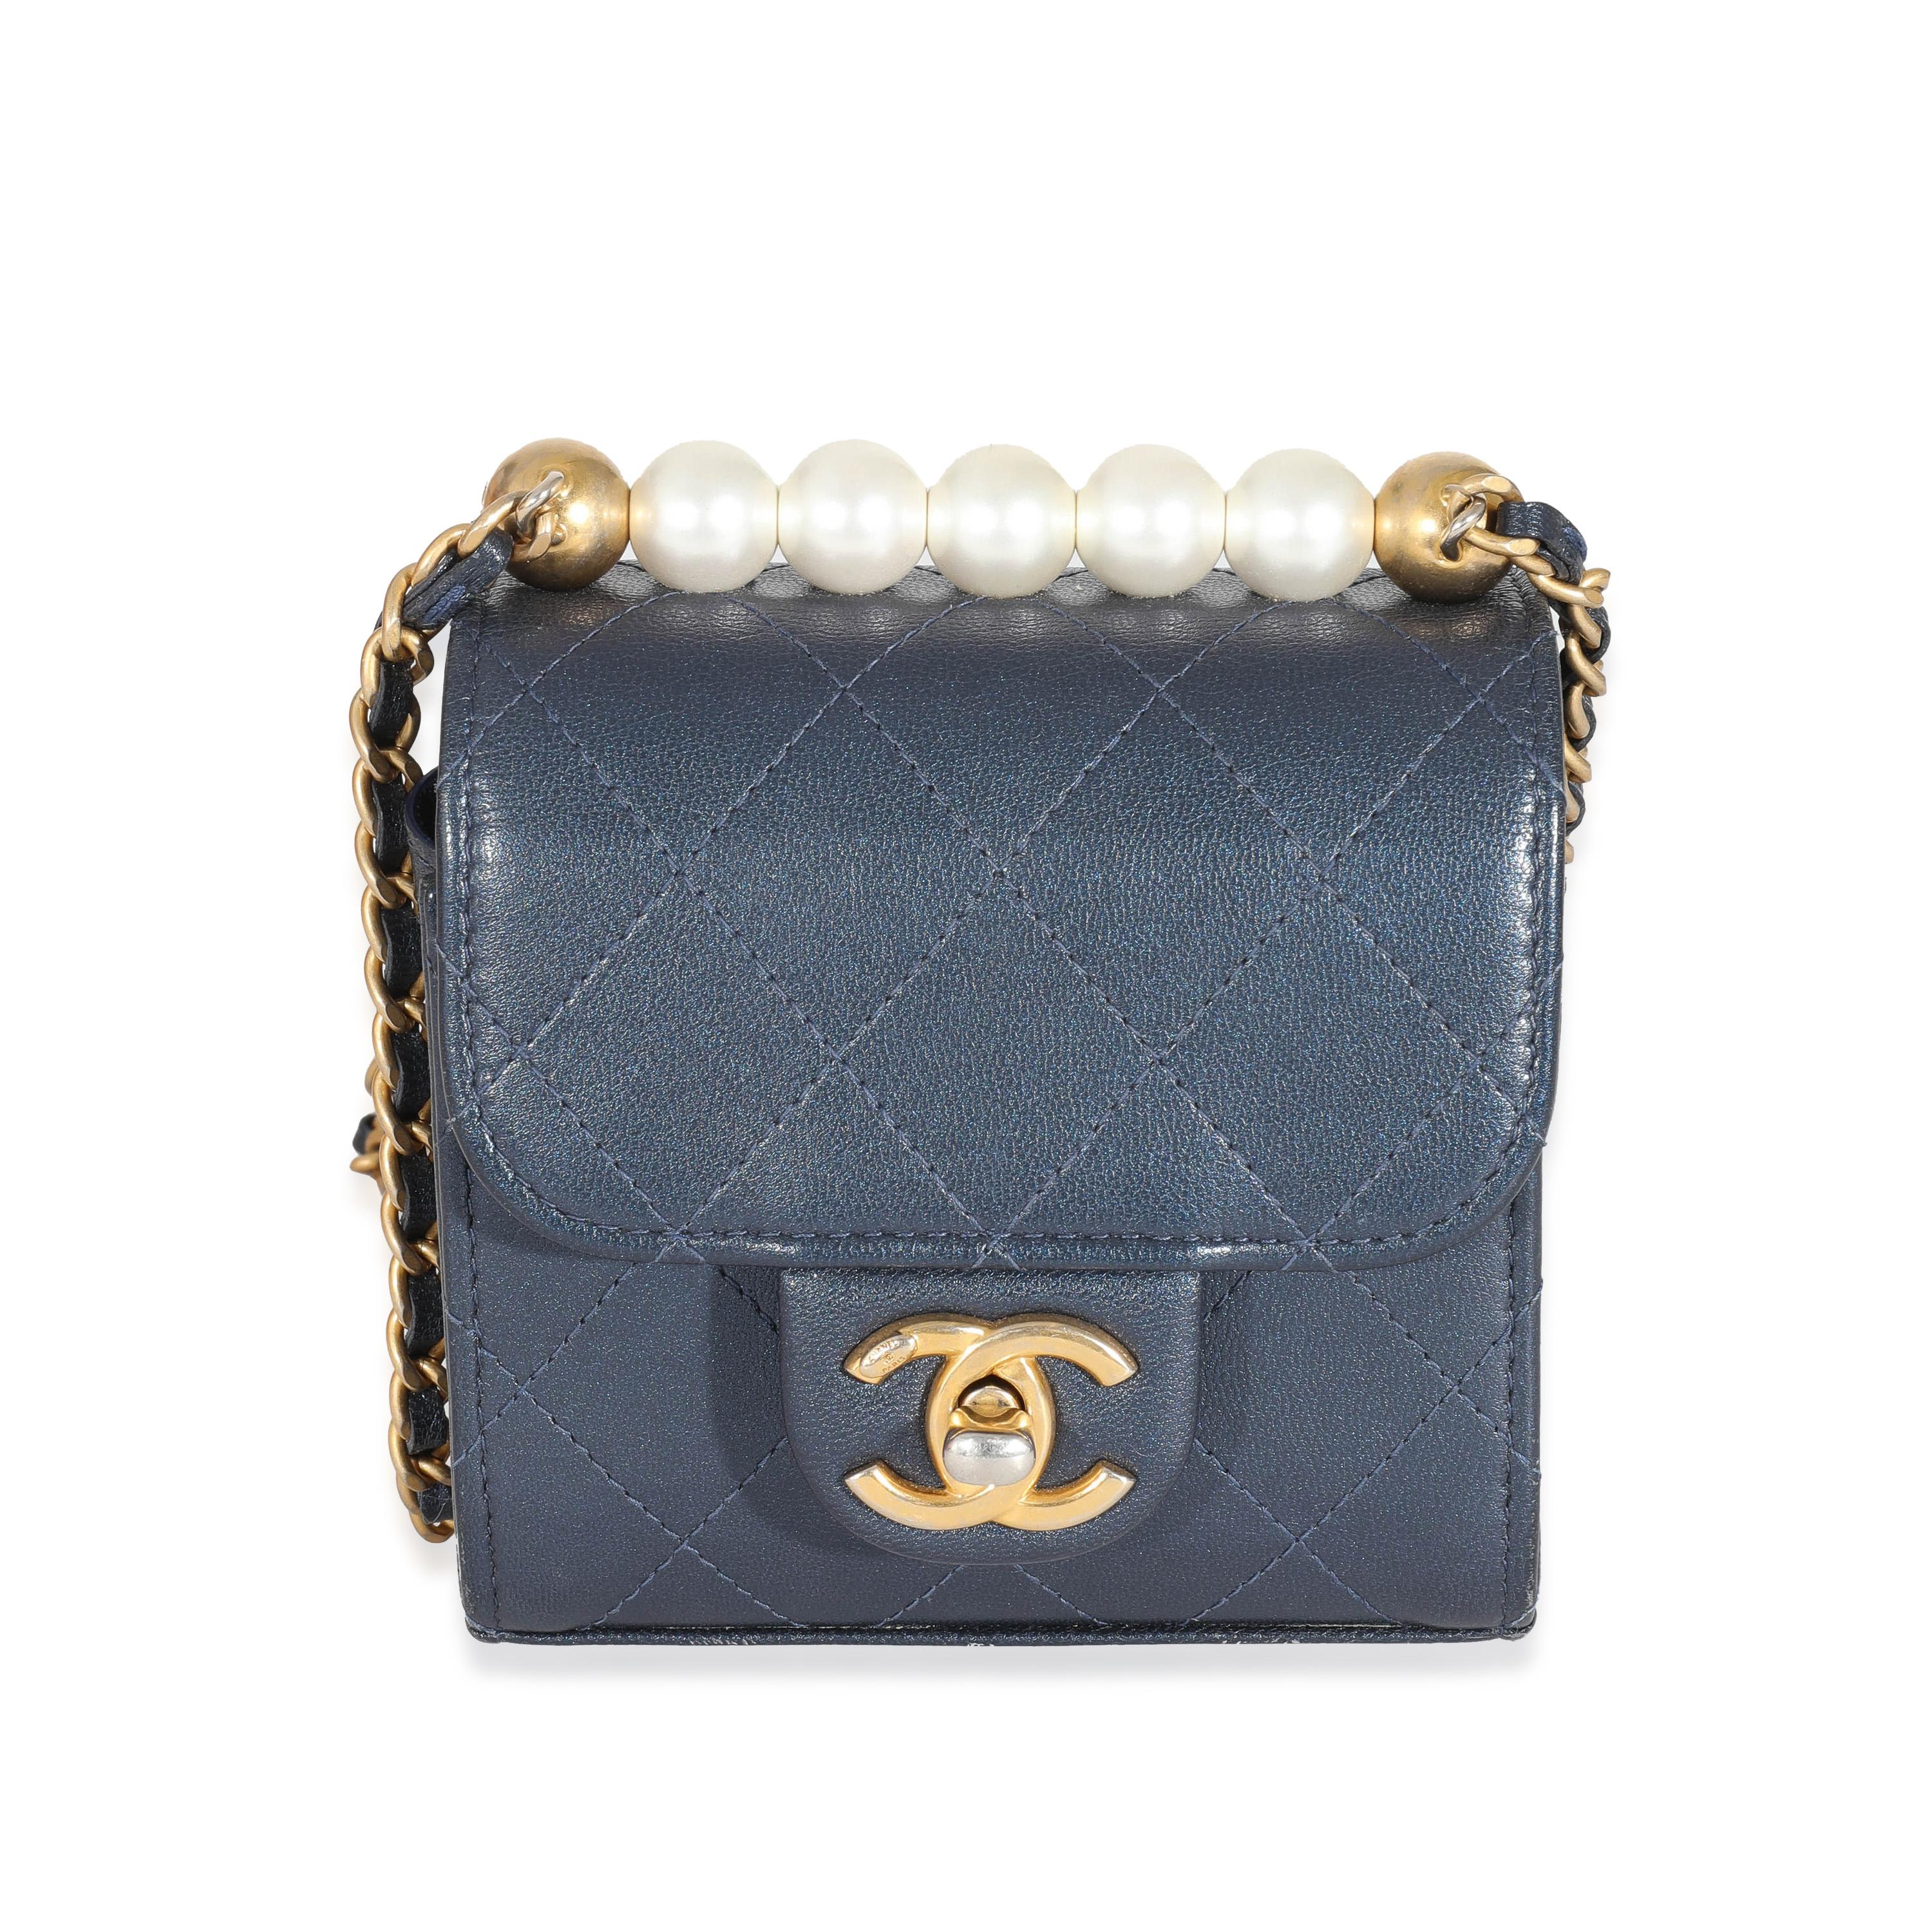 Chanel Navy Goatskin Chic Pearls Mini Flap Bag For Sale 5